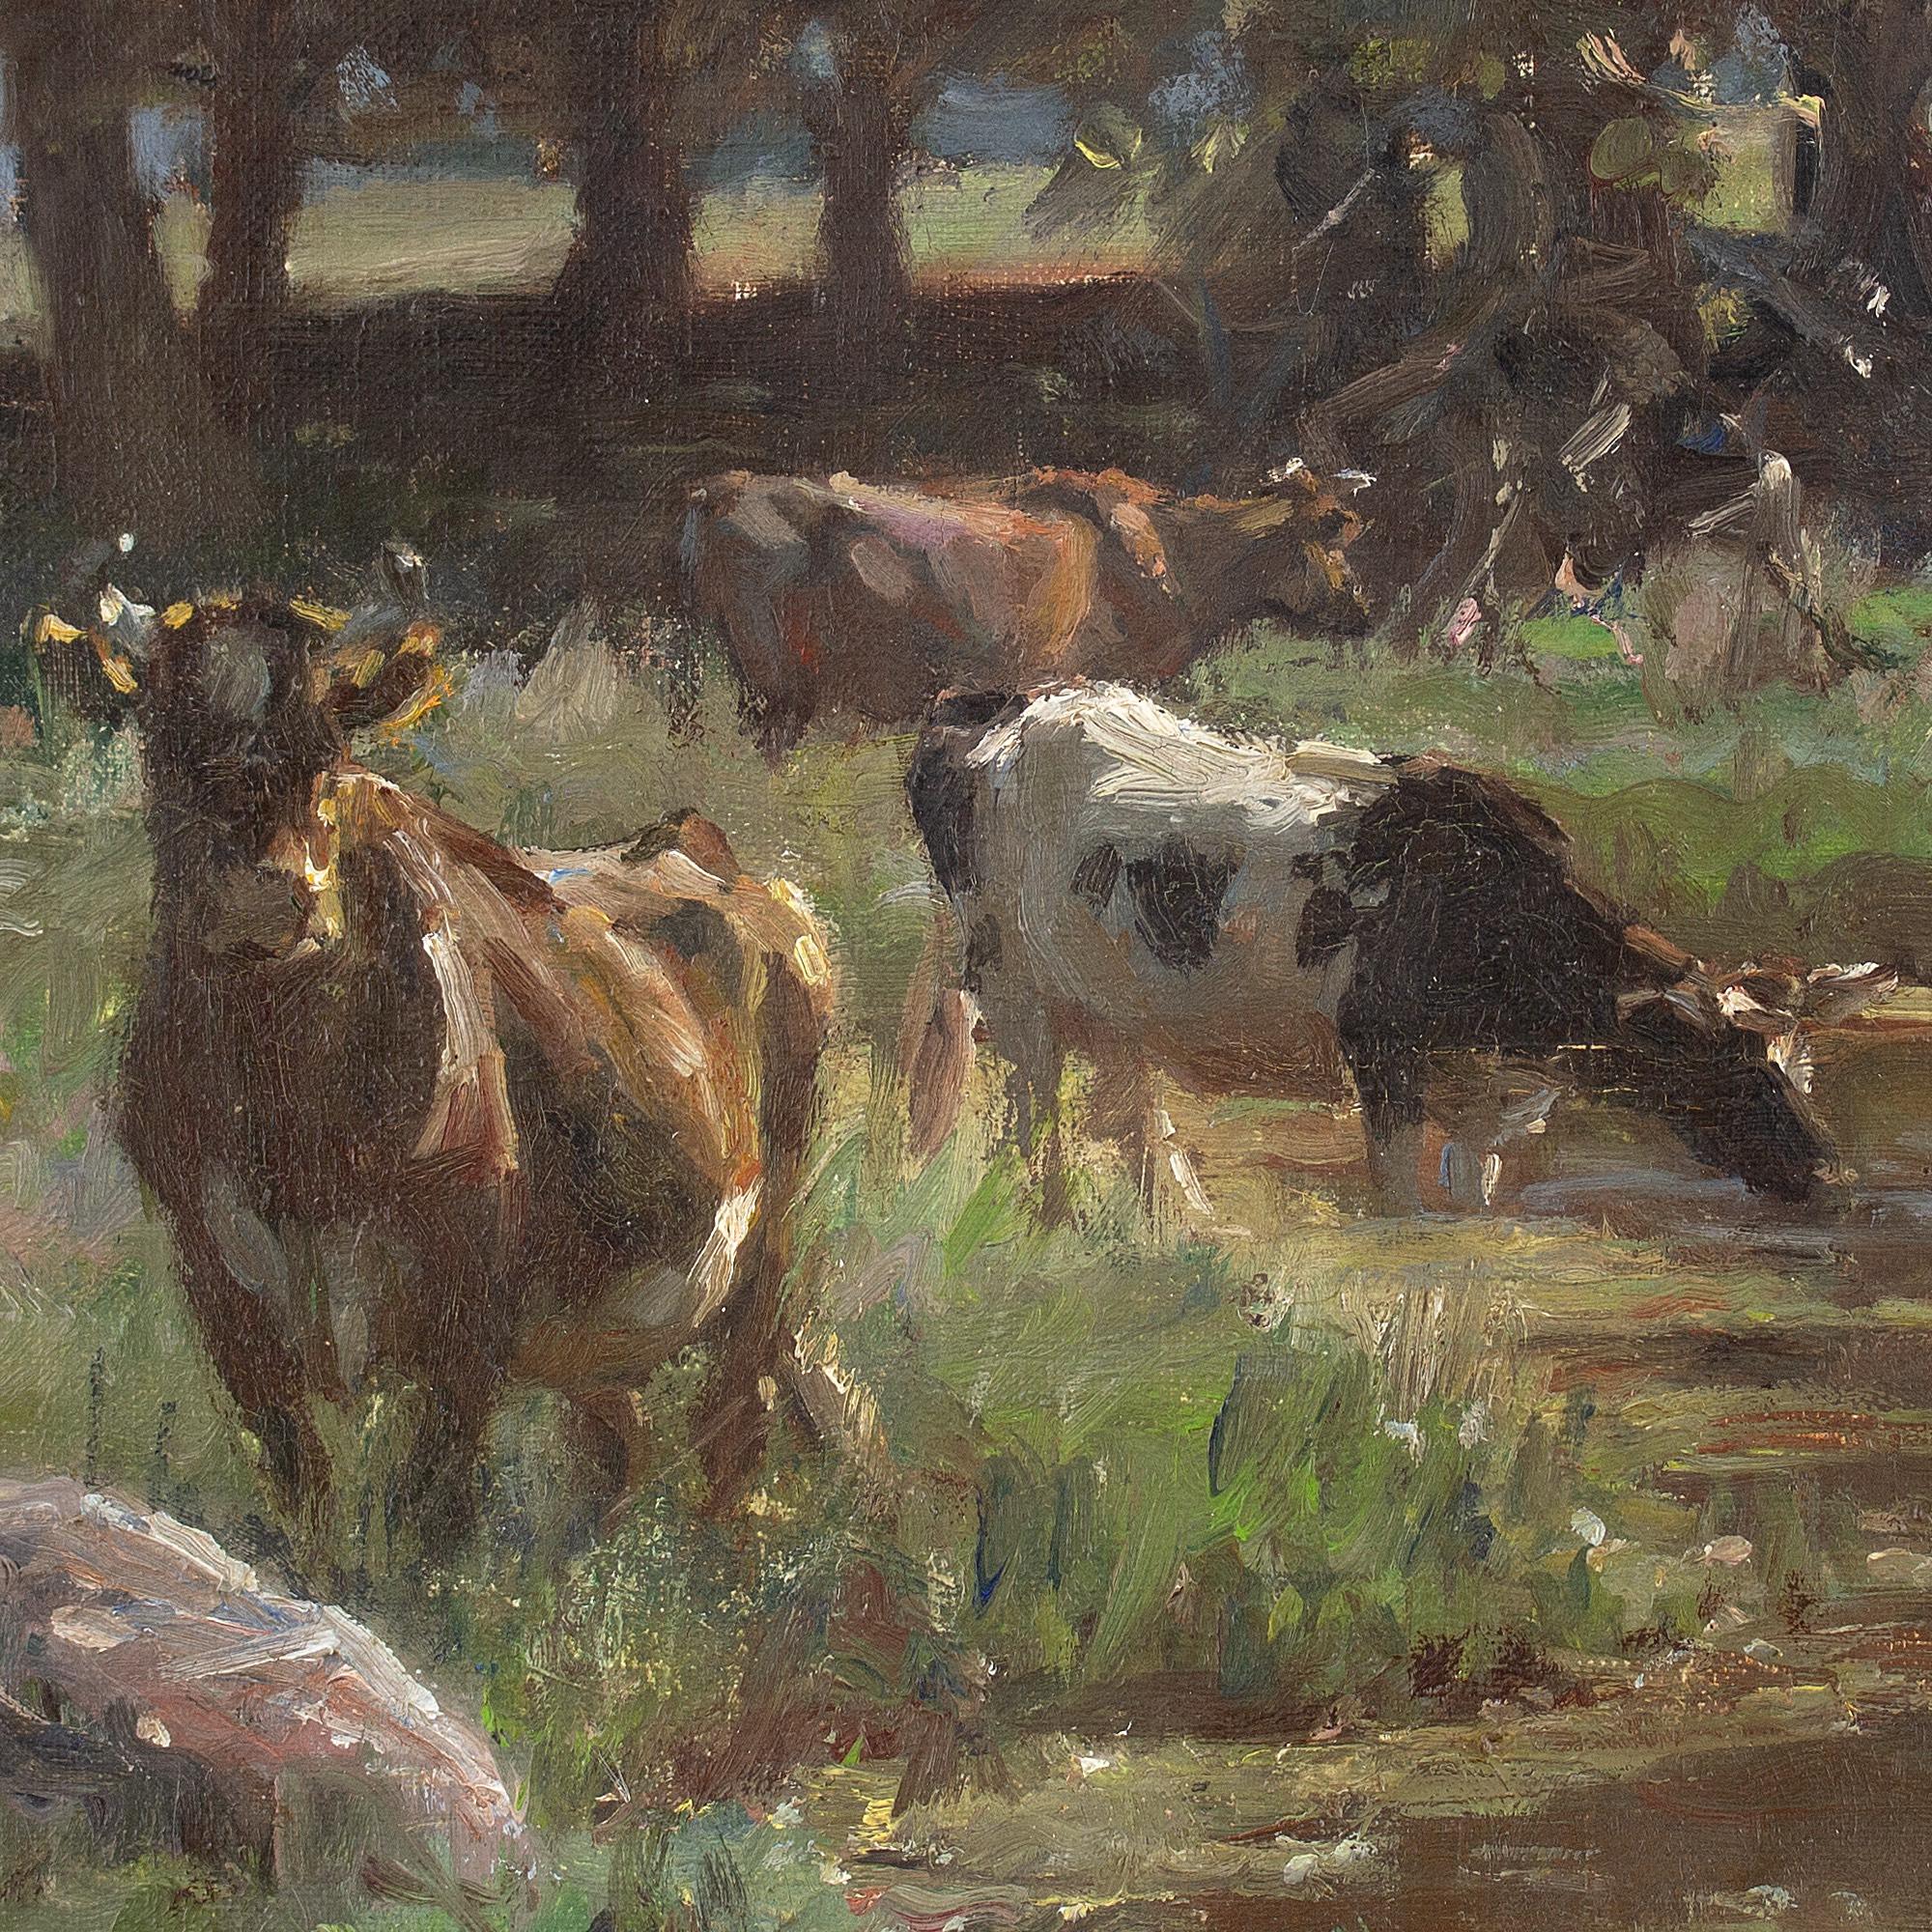 Michael Therkildsen, Pastoral Landscape With Cattle & Pond, Antique Oil Painting 3